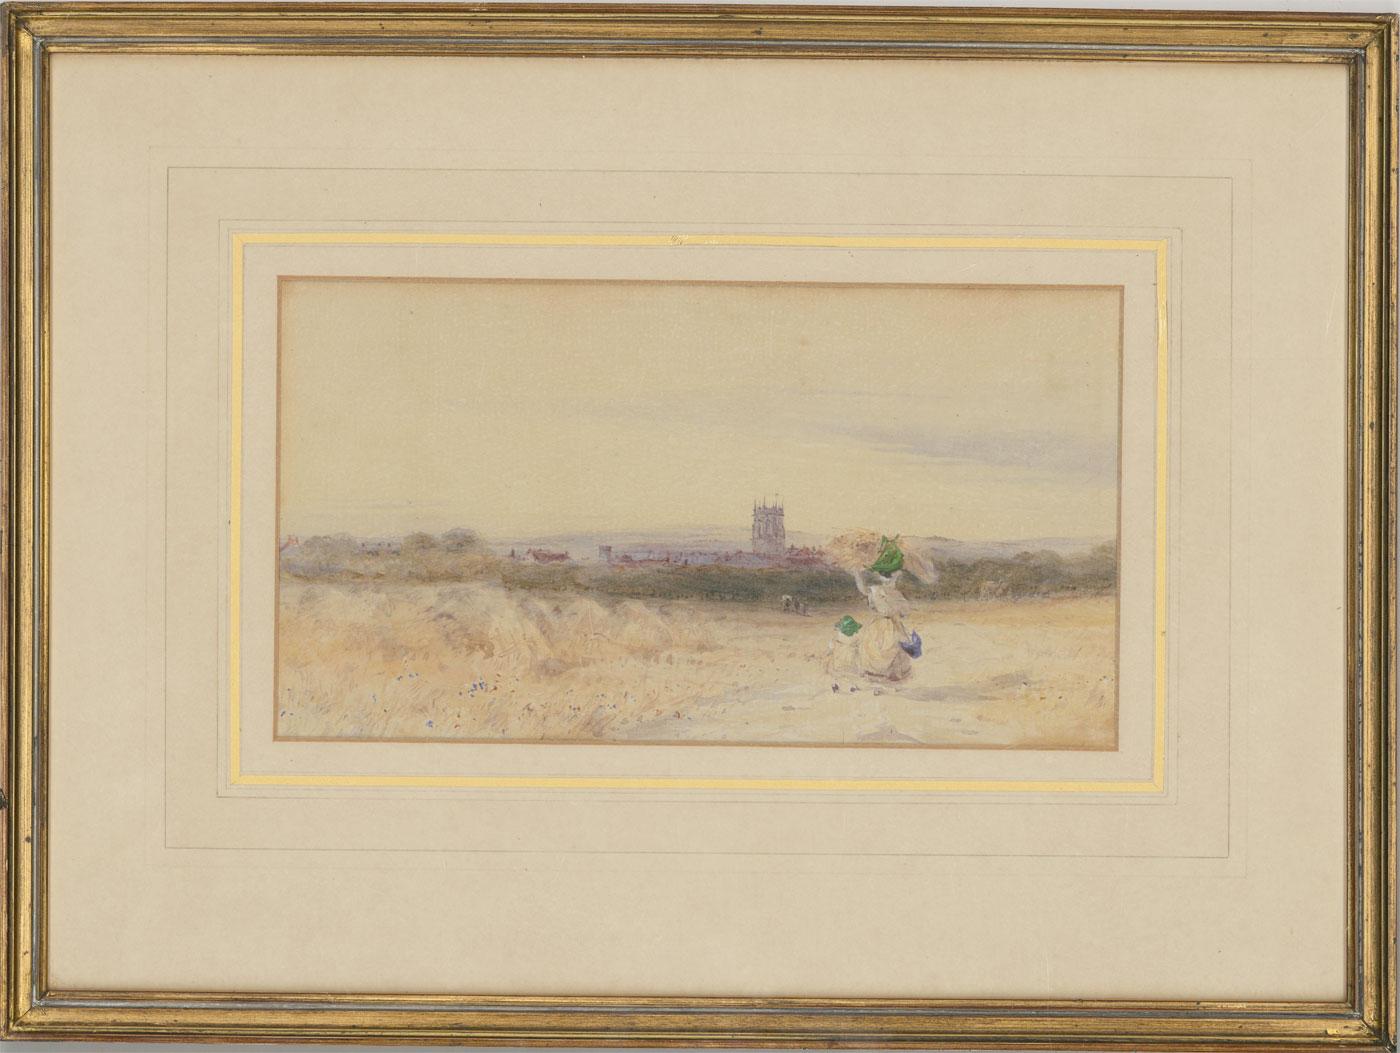 A very fine and delightfully detailed late 19th century watercolour, attributed to the artist Frederick Barry. This well-composed landscape view characterises the romanticisation of the pastoral genre that developed in popularity in the latter half